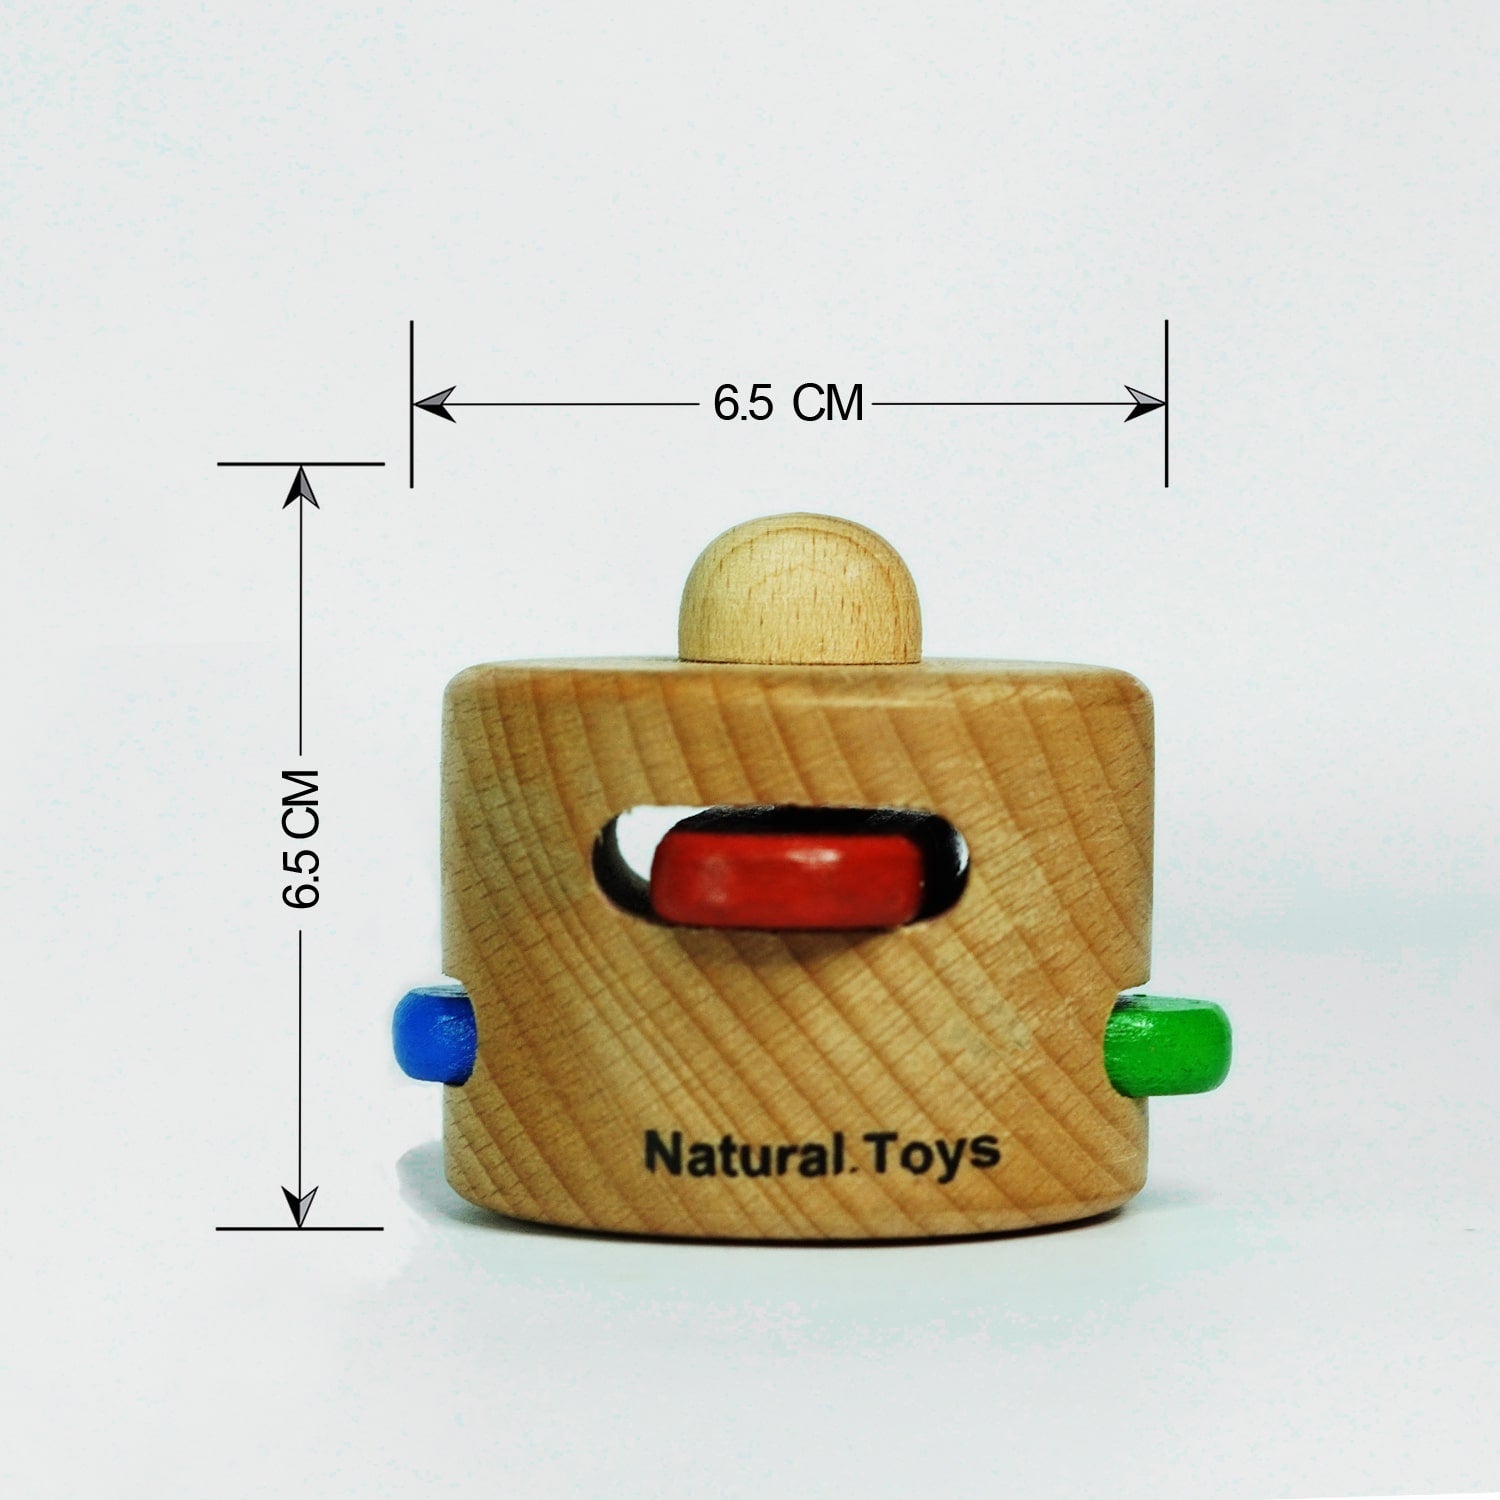 Natural Toys | Wooden Toys Combo Gift Kit for 6 Month+ | 1 Wooden Push Pull Toy Car, 1 Wooden Peek-A-Boo, 2 Wooden Maracas Toy, 1 Wooden Amazing Car (Pack of Seven Toys)